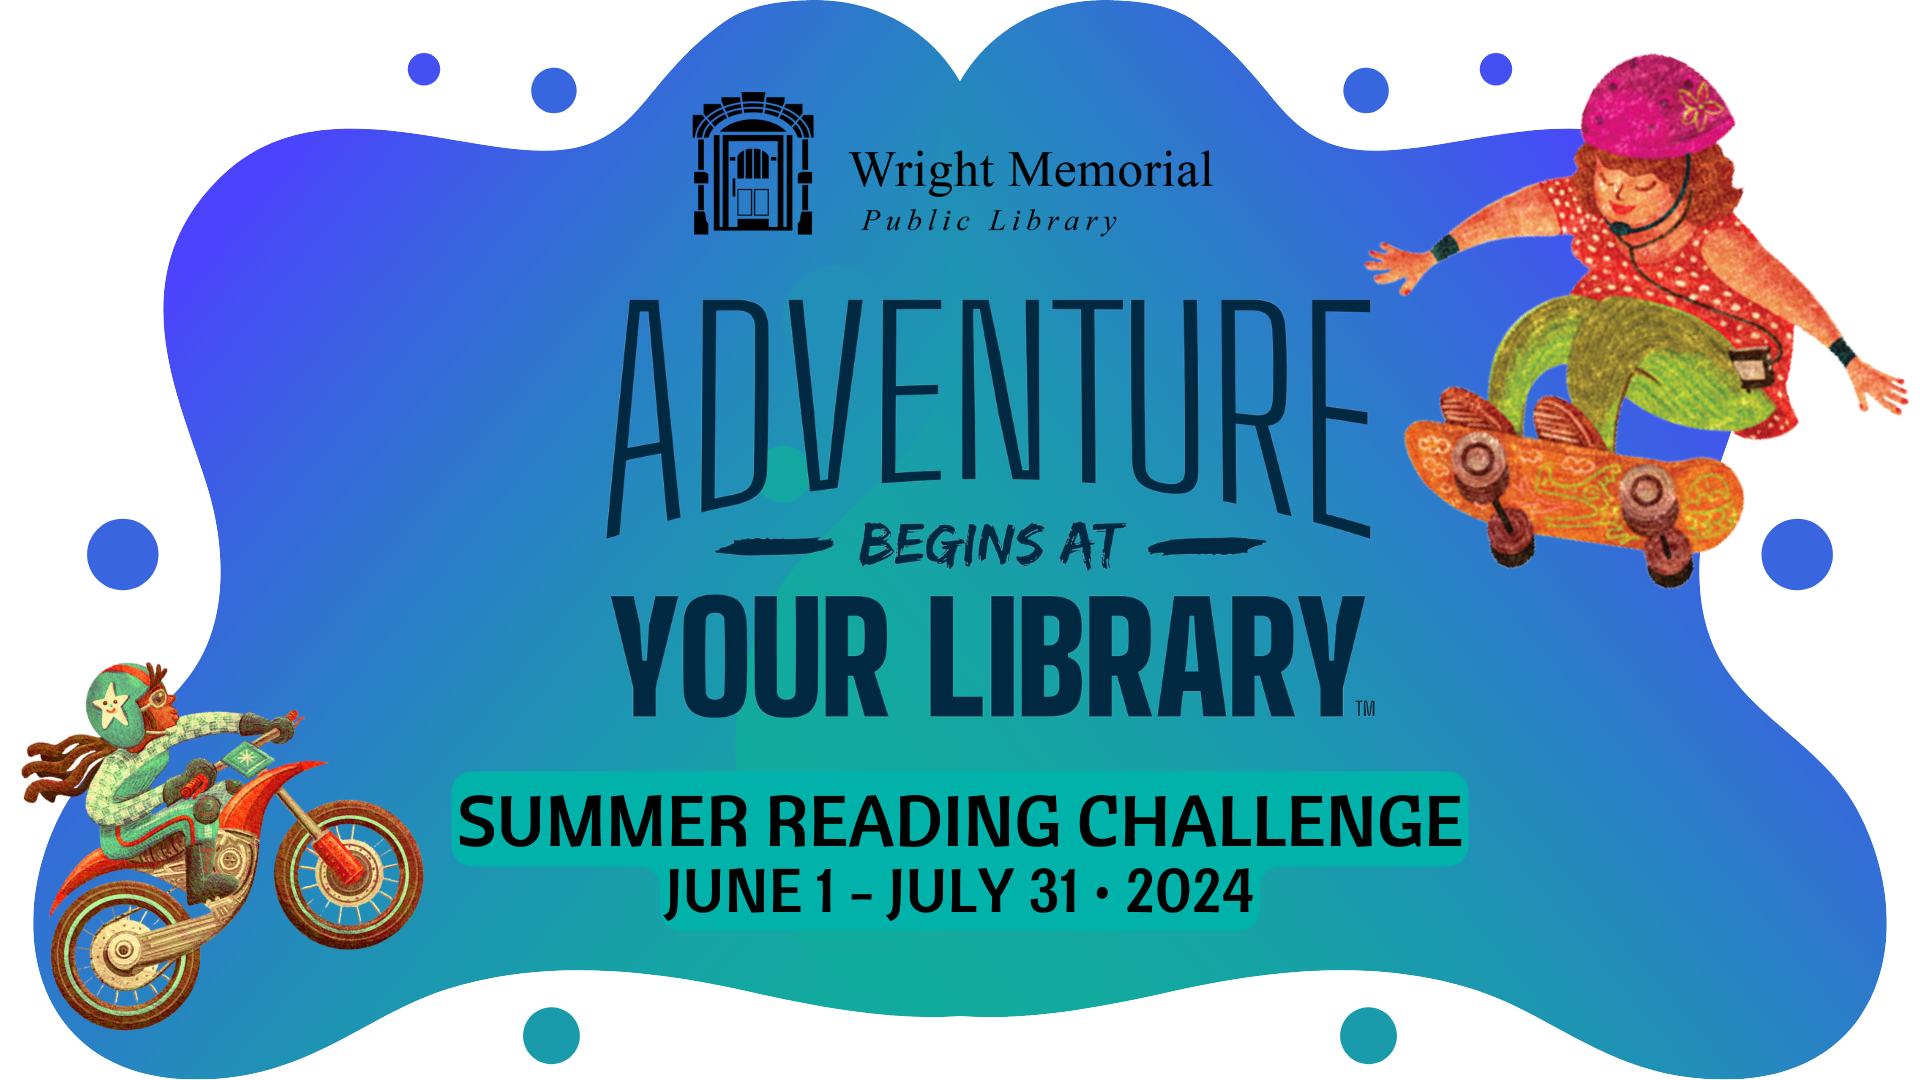 Wright Library Summer Reading Challenge 2024 "Adventure Begins at Your Library" with motorcyclist and skateboardist